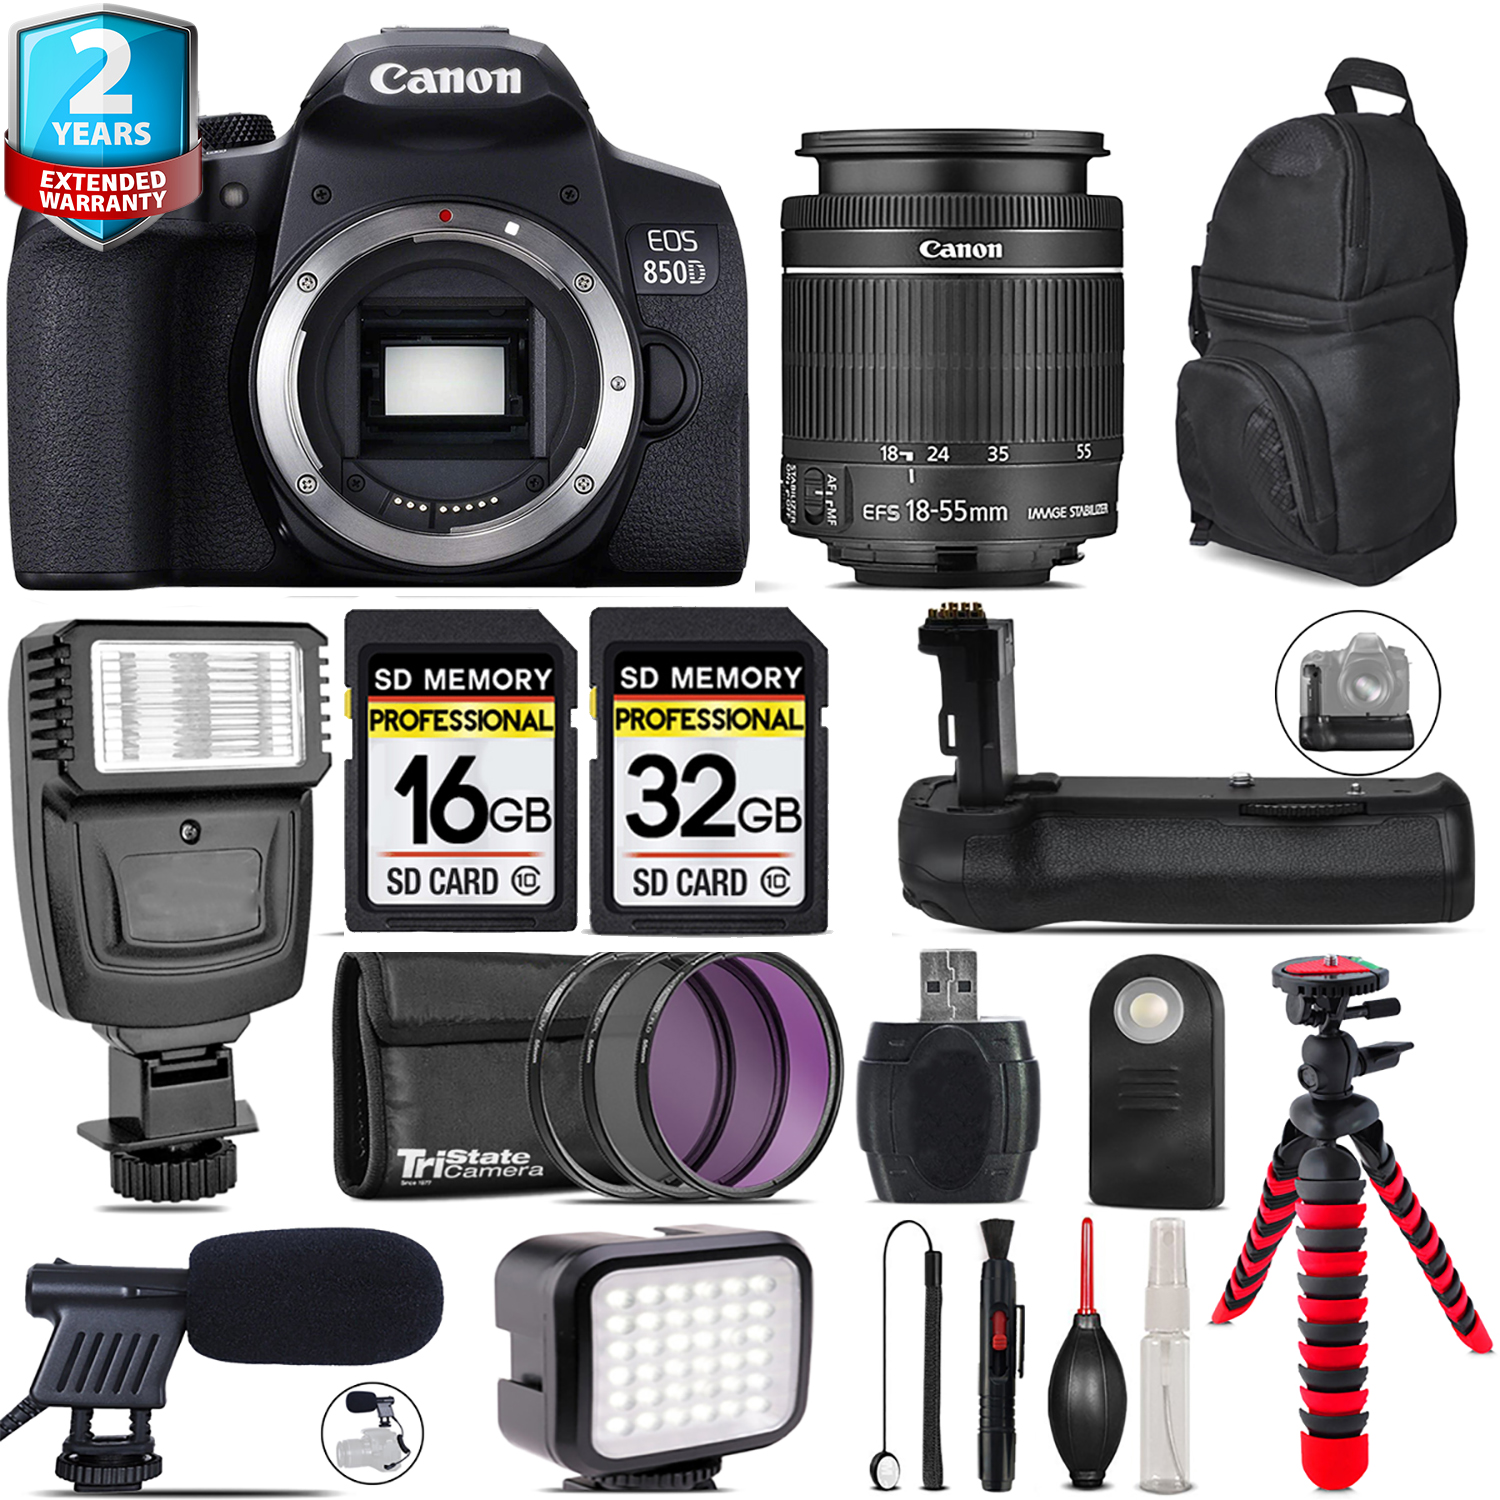 EOS 850D (Rebel T8i) + 18-55mm IS STM + LED Kit + Mic + Battery Grip + 48GB *FREE SHIPPING*